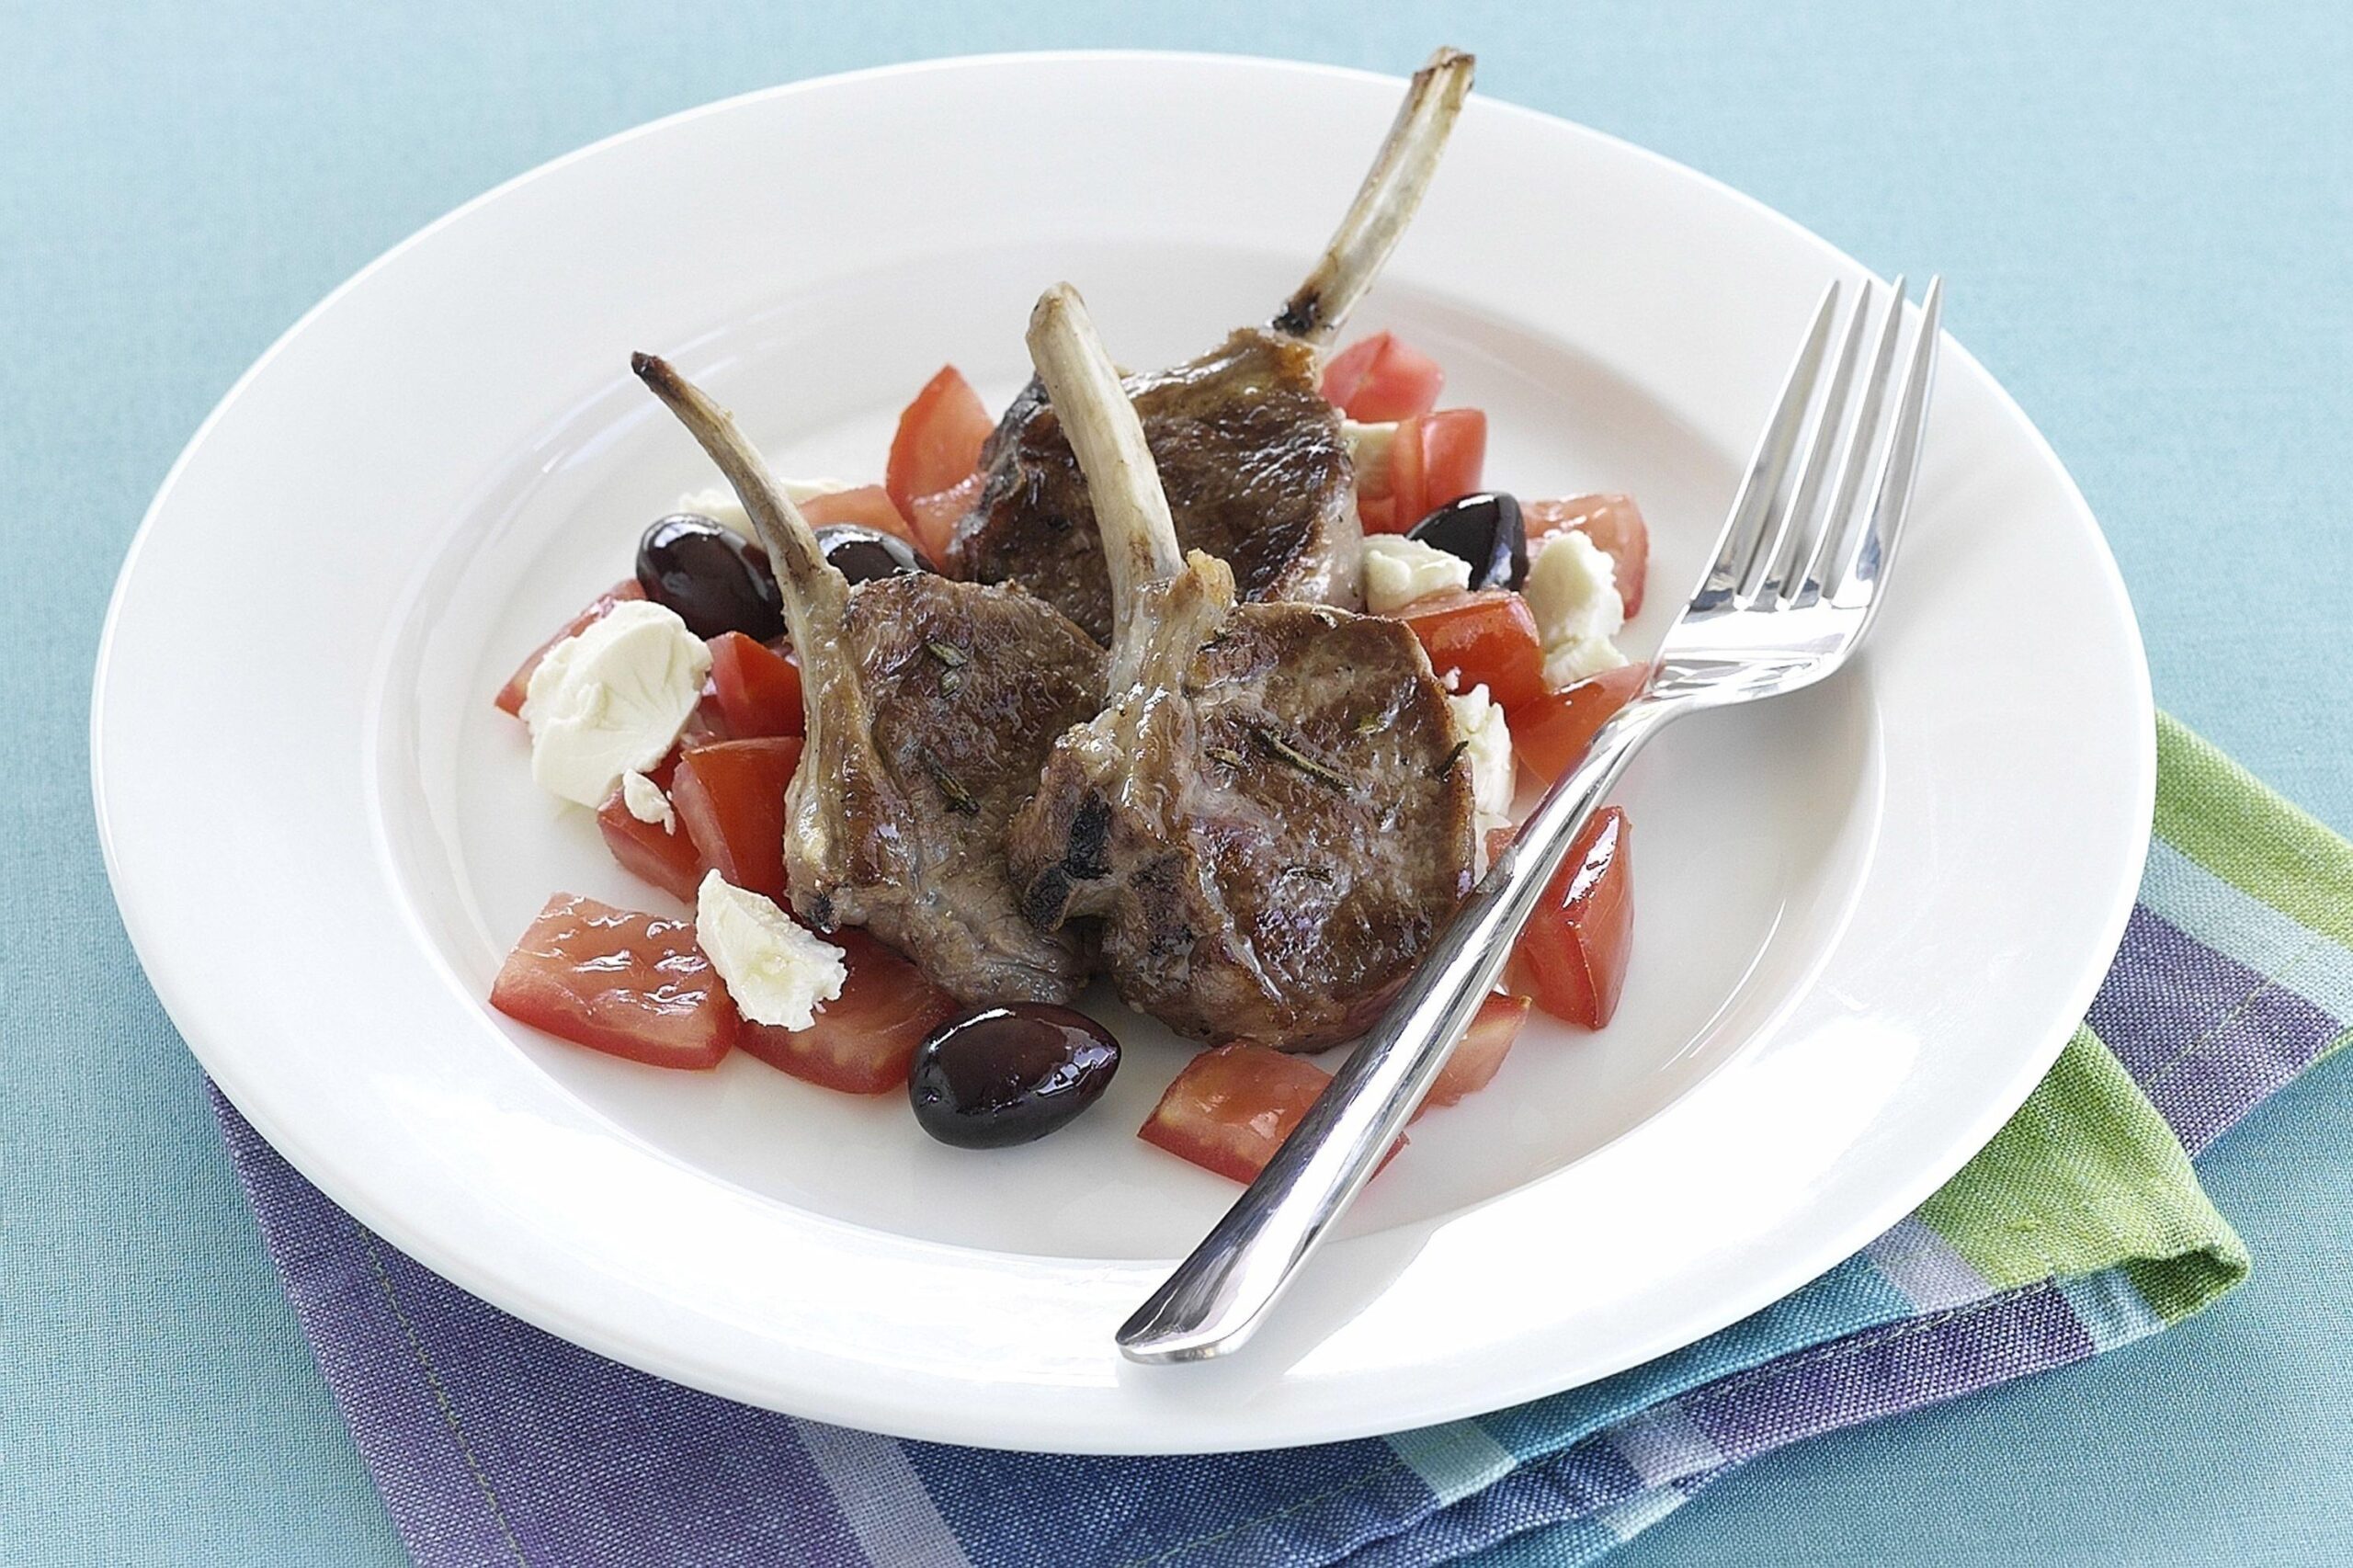  The longer you cook, the richer it gets. Slow-cooking lamb chops with white wine is worth the wait.